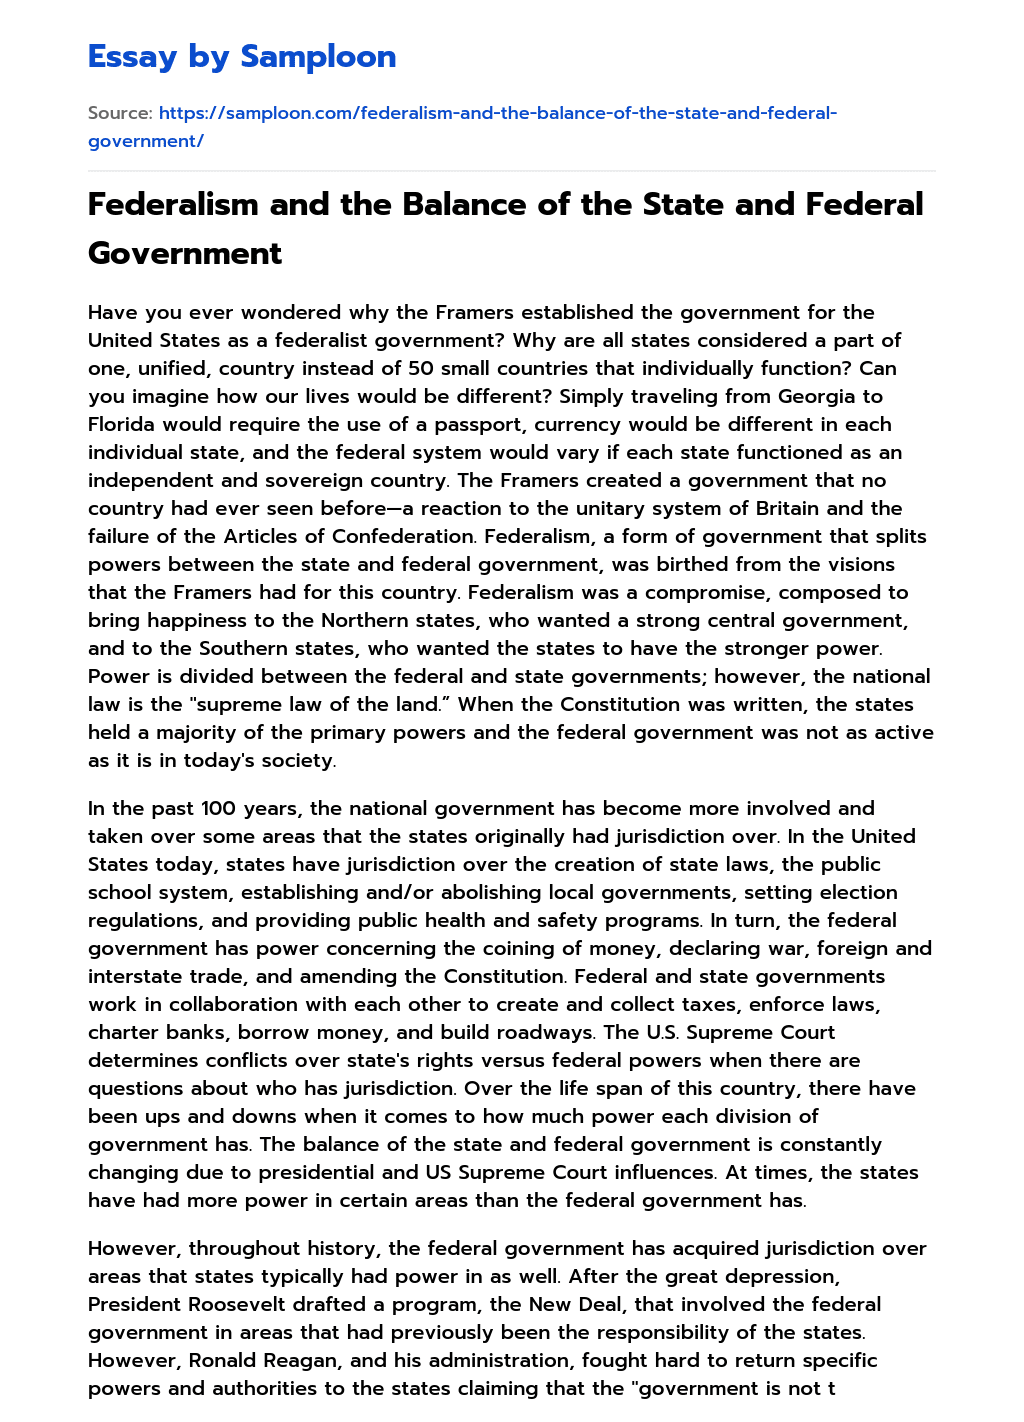 Federalism and the Balance of the State and Federal Government essay